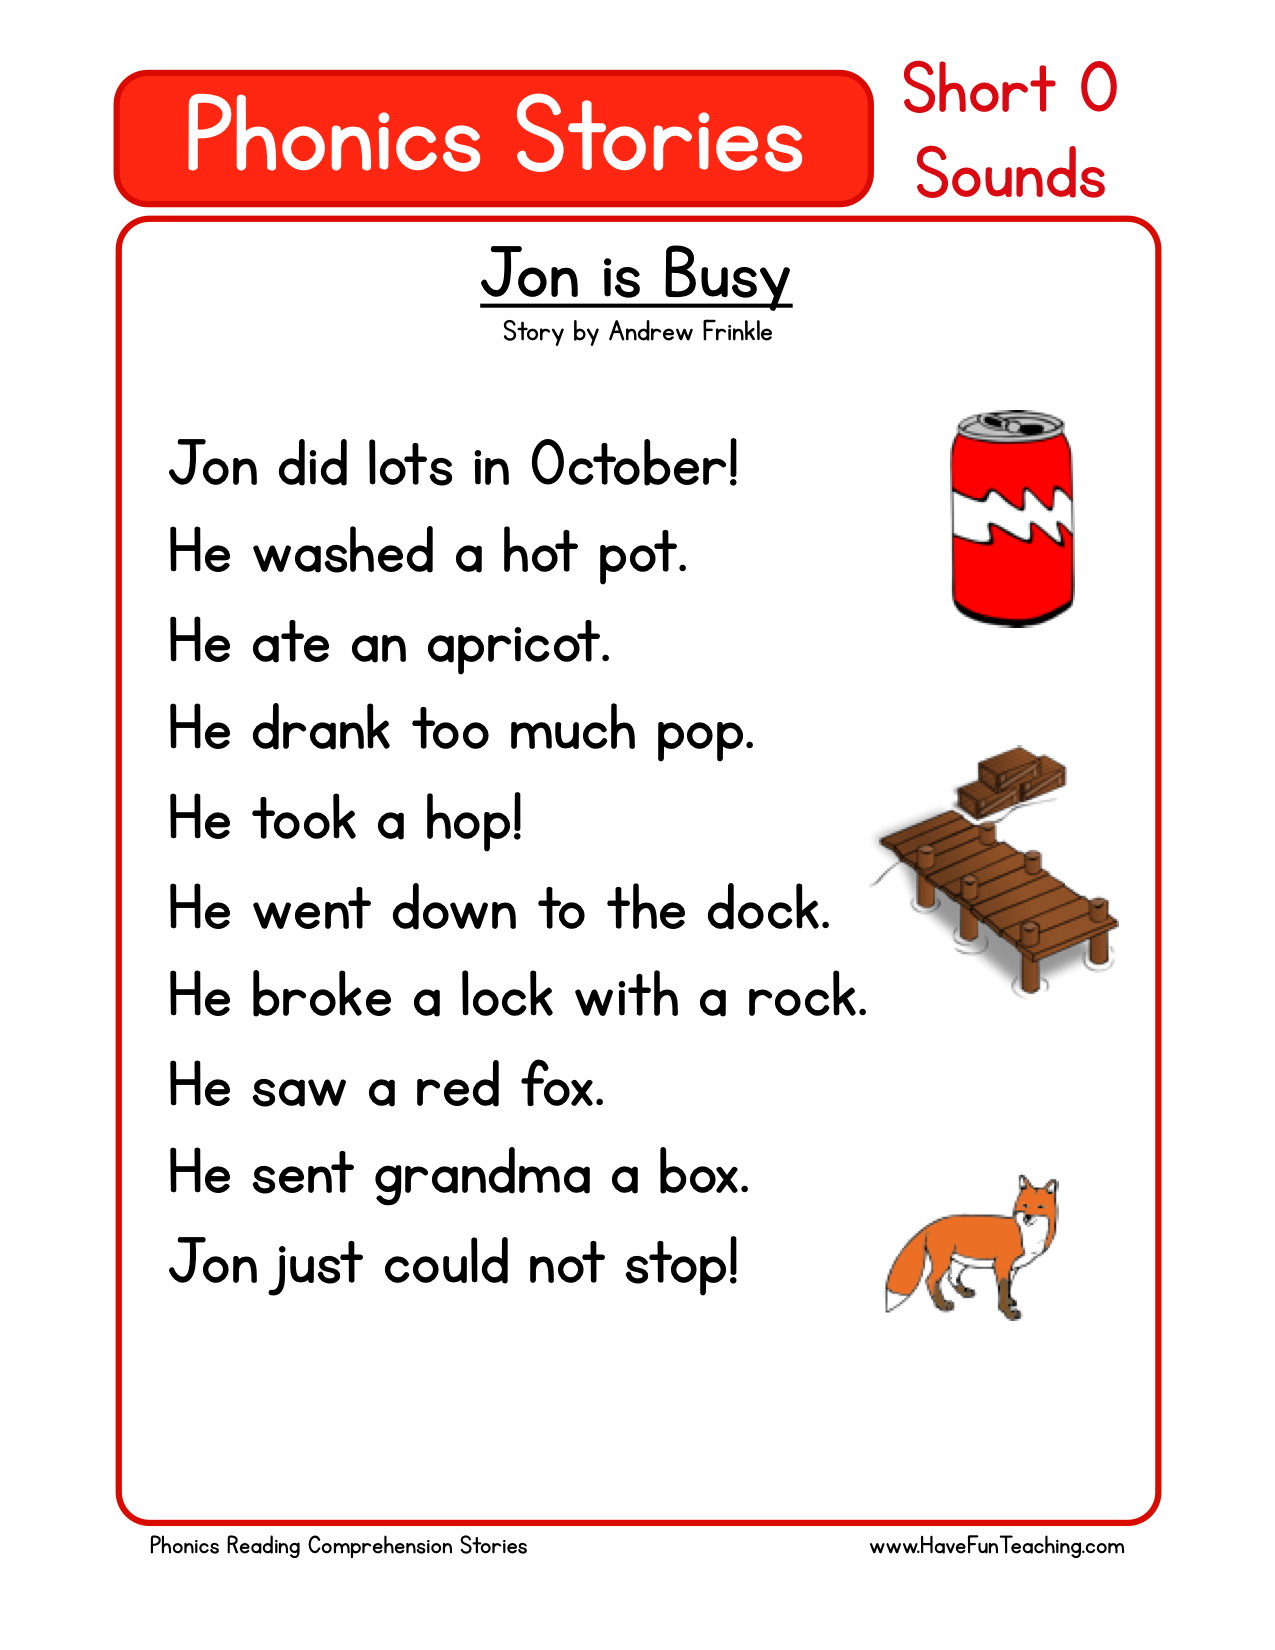 Reading Comprehension Worksheet - Jon is Busy